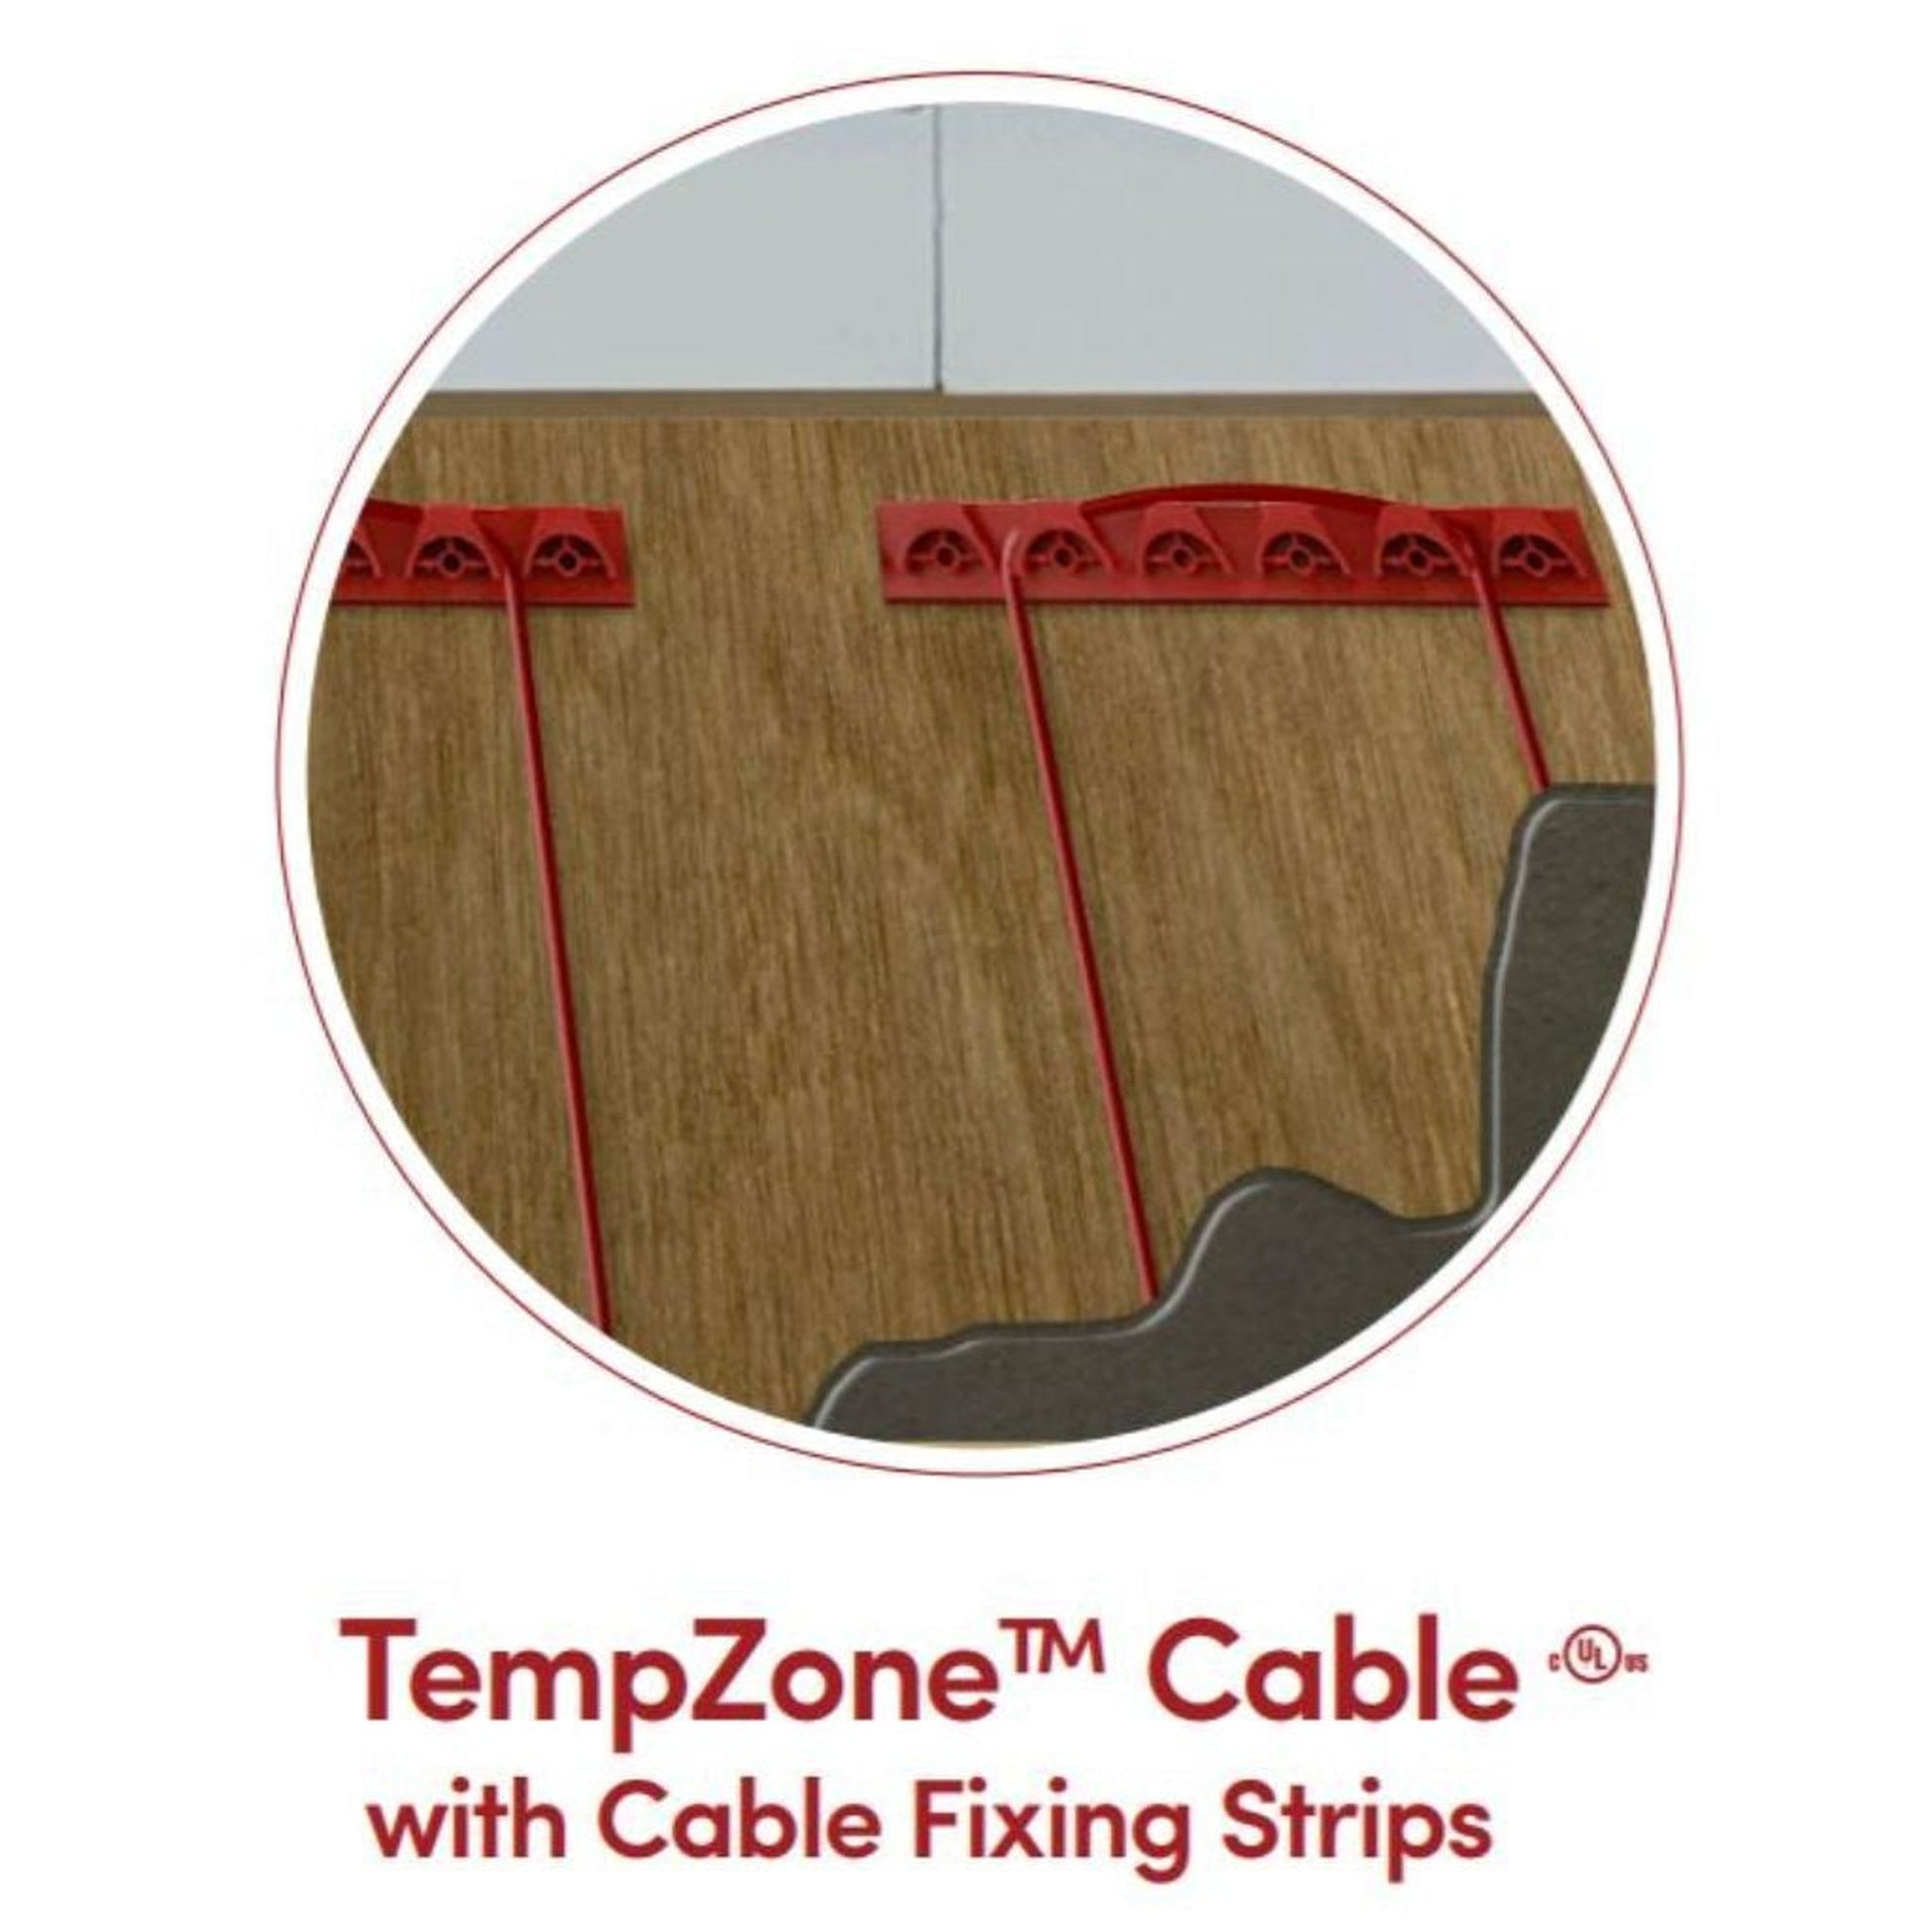 WarmlyYours TempZone Cable 515′ 240V Radiant Floor Heating Cable System Kit With nSpire Touch Programmable Touchscreen Thermostat